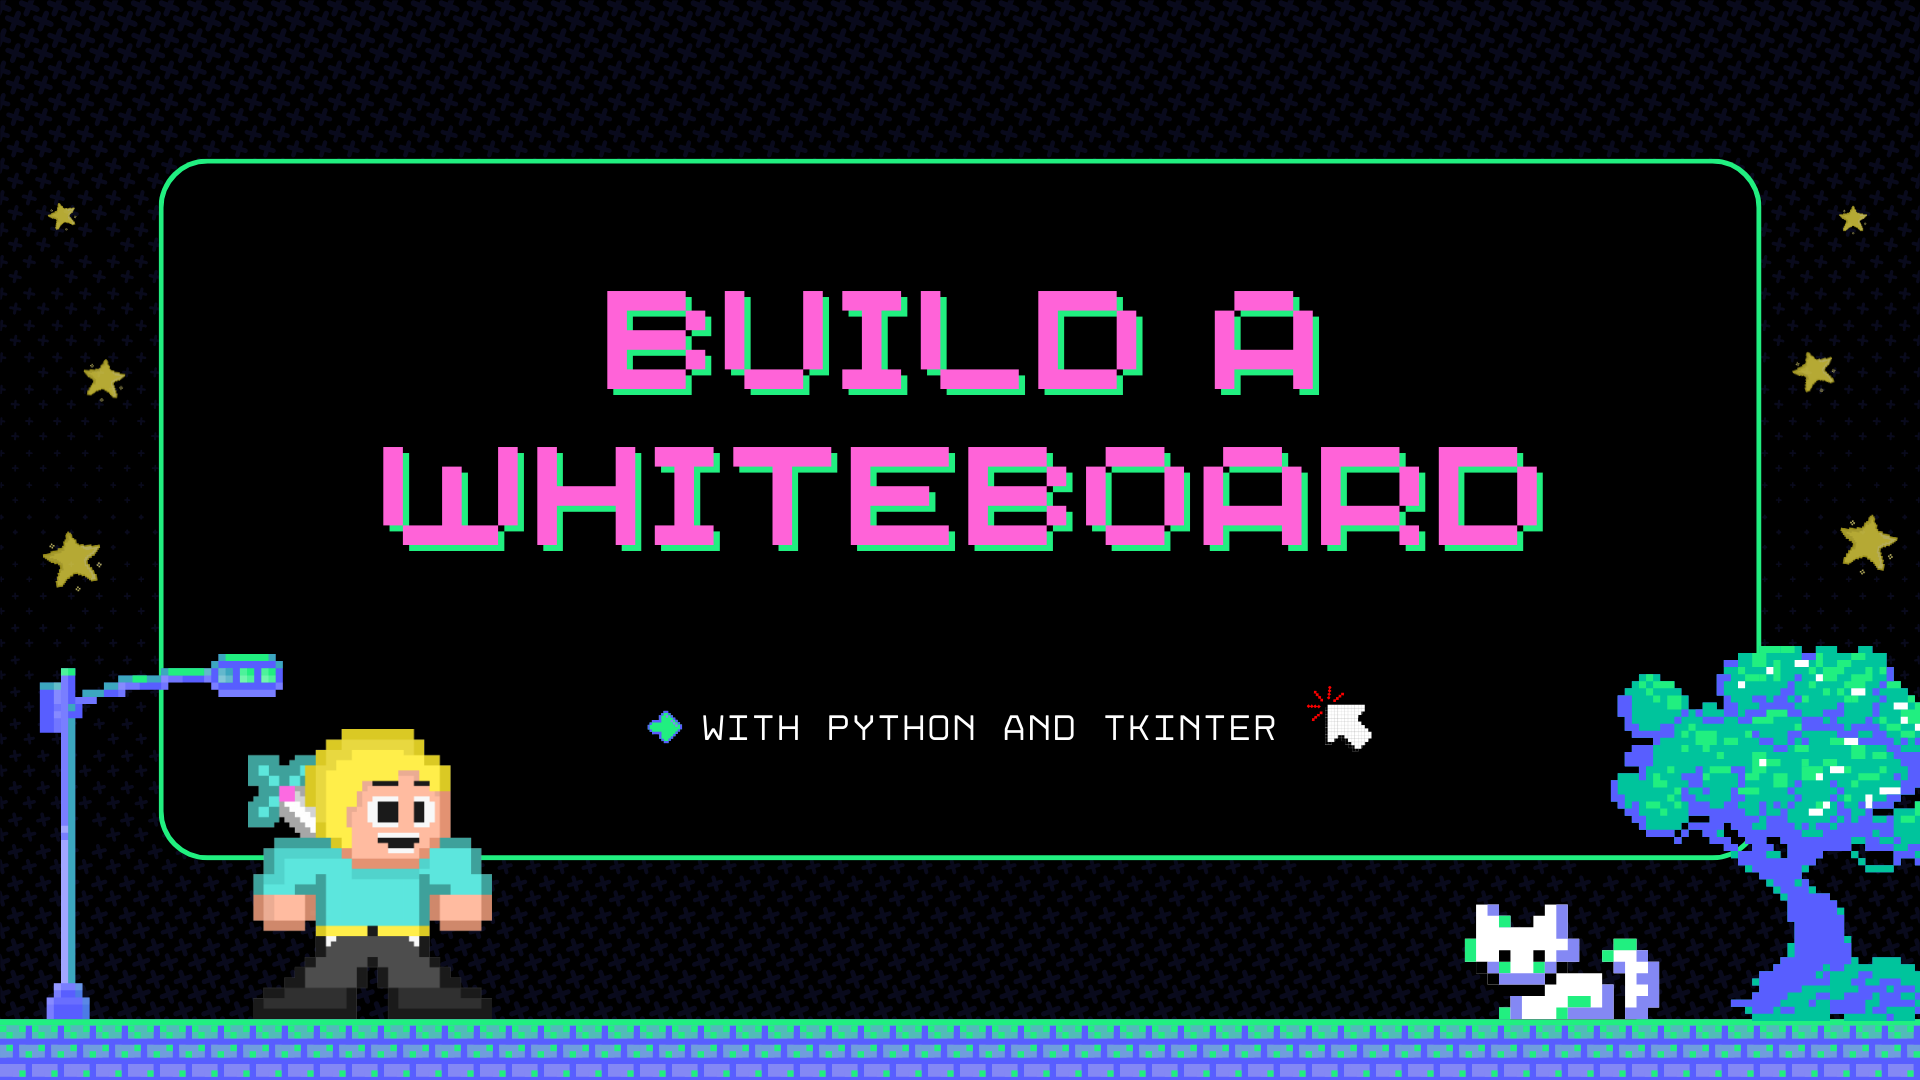 How to Build a Whiteboard App with Python and Tkinter